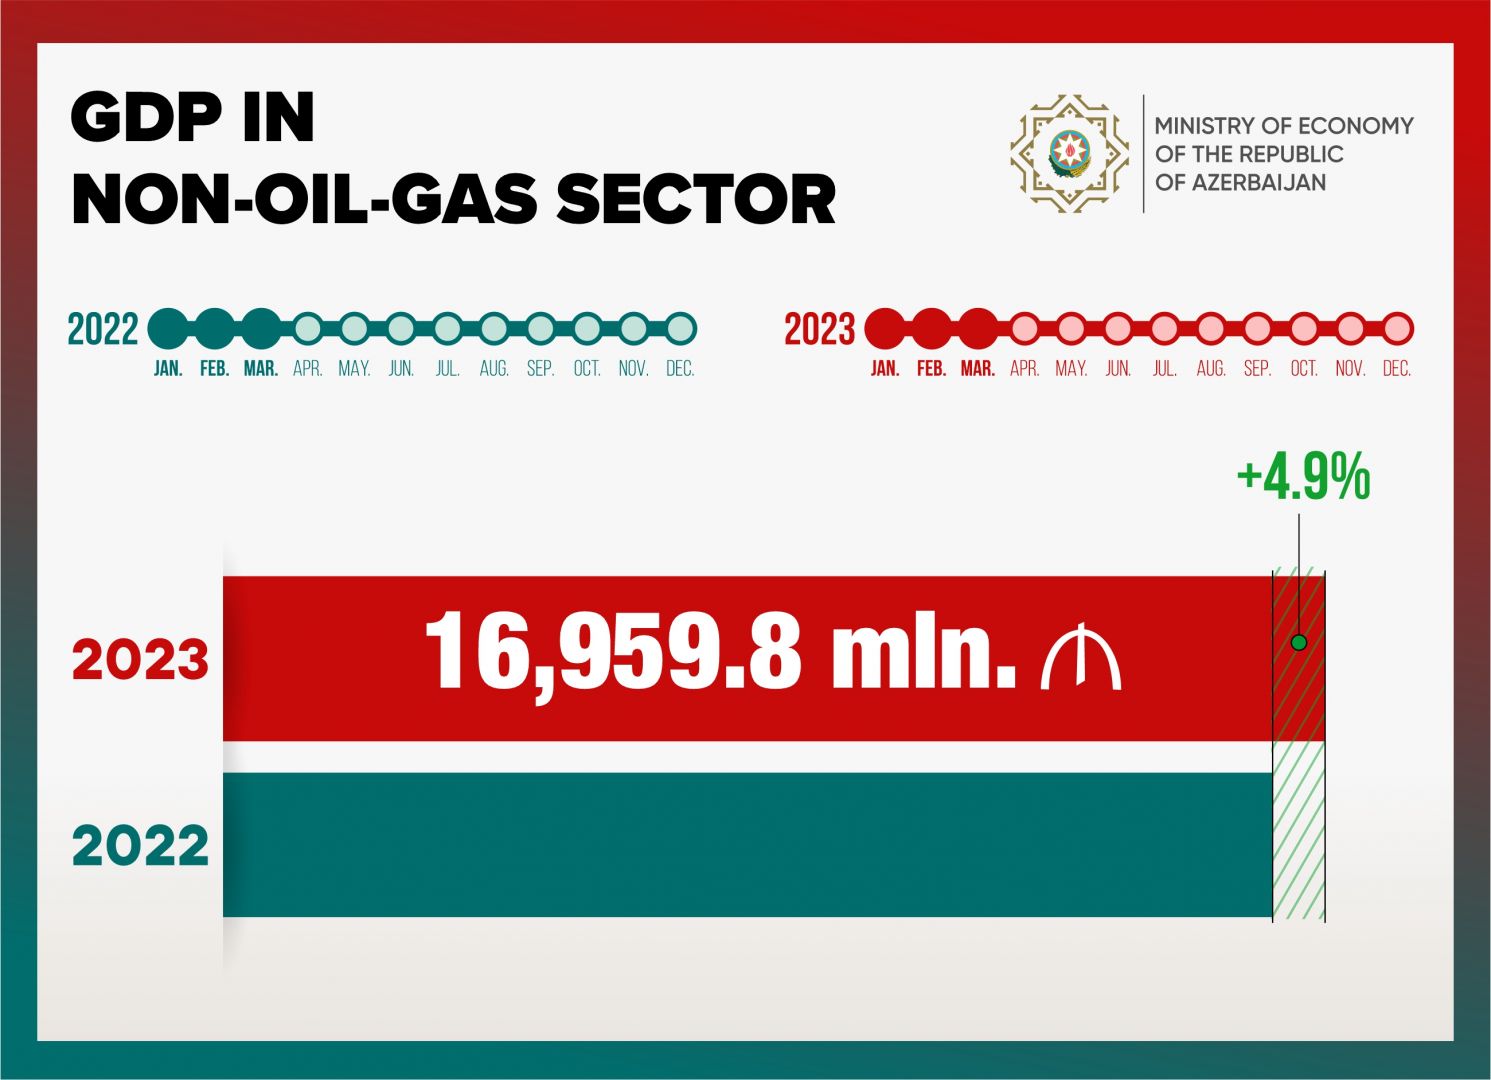 Azerbaijani GDP in non-oil-and-gas sector increases